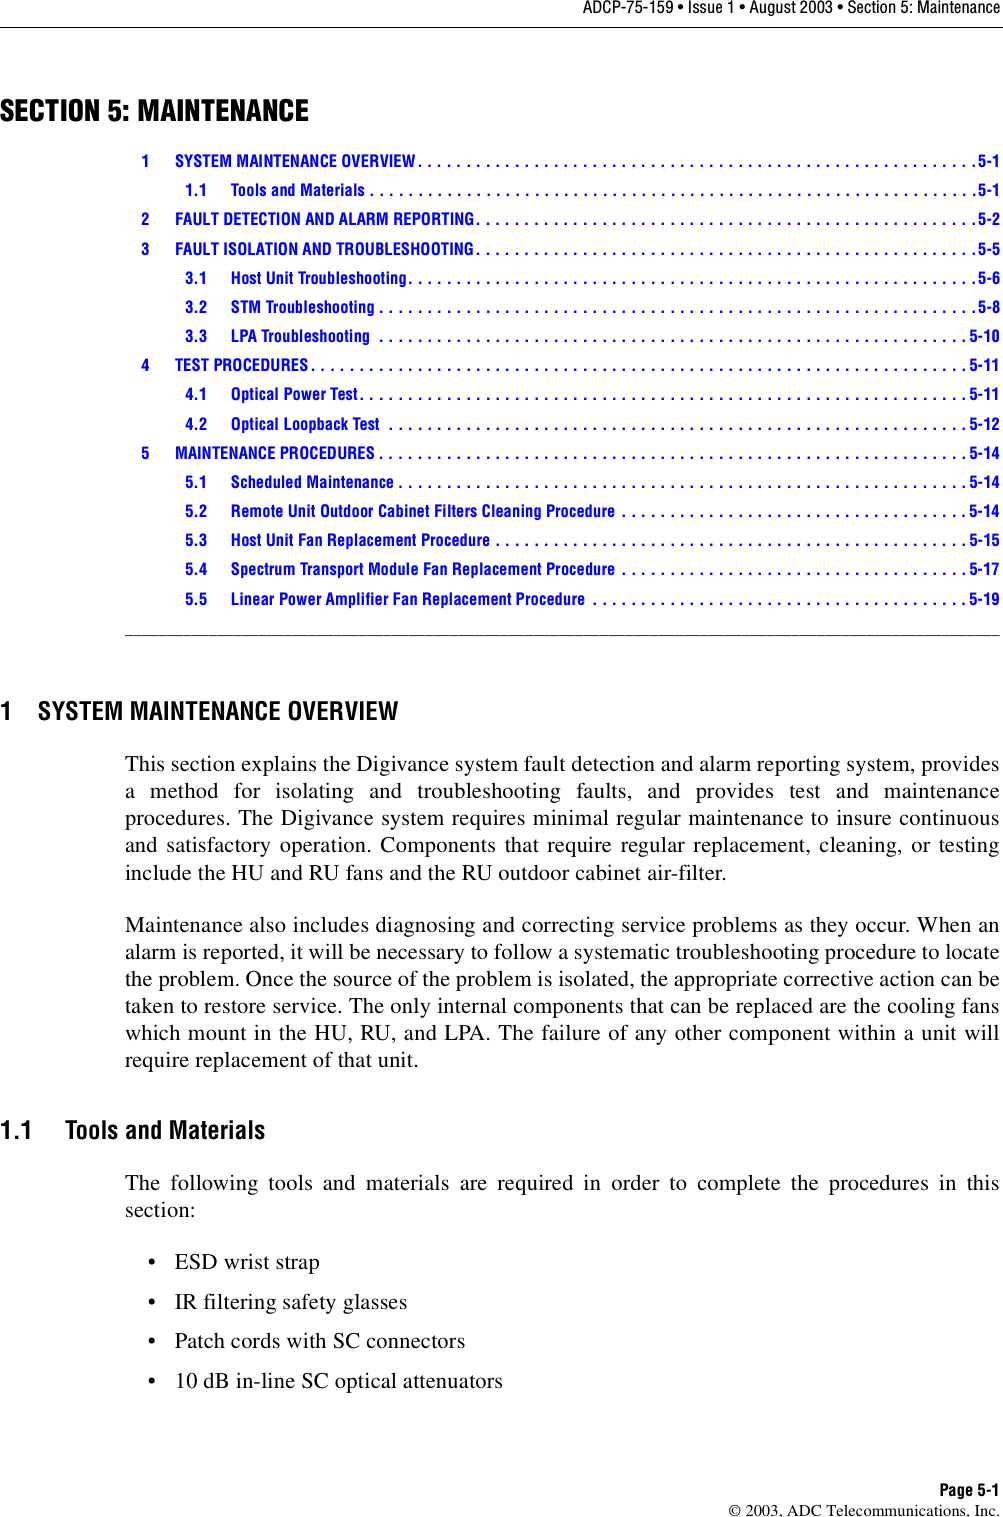 ADCP-75-159 • Issue 1 • August 2003 • Section 5: MaintenancePage 5-1© 2003, ADC Telecommunications, Inc.SECTION 5: MAINTENANCE1 SYSTEM MAINTENANCE OVERVIEW. . . . . . . . . . . . . . . . . . . . . . . . . . . . . . . . . . . . . . . . . . . . . . . . . . . . . . . . . .5-11.1 Tools and Materials . . . . . . . . . . . . . . . . . . . . . . . . . . . . . . . . . . . . . . . . . . . . . . . . . . . . . . . . . . . . . . .5-12 FAULT DETECTION AND ALARM REPORTING. . . . . . . . . . . . . . . . . . . . . . . . . . . . . . . . . . . . . . . . . . . . . . . . . . . .5-23 FAULT ISOLATION AND TROUBLESHOOTING. . . . . . . . . . . . . . . . . . . . . . . . . . . . . . . . . . . . . . . . . . . . . . . . . . . .5-53.1 Host Unit Troubleshooting. . . . . . . . . . . . . . . . . . . . . . . . . . . . . . . . . . . . . . . . . . . . . . . . . . . . . . . . . . .5-63.2 STM Troubleshooting . . . . . . . . . . . . . . . . . . . . . . . . . . . . . . . . . . . . . . . . . . . . . . . . . . . . . . . . . . . . . .5-83.3 LPA Troubleshooting  . . . . . . . . . . . . . . . . . . . . . . . . . . . . . . . . . . . . . . . . . . . . . . . . . . . . . . . . . . . . . 5-104 TEST PROCEDURES. . . . . . . . . . . . . . . . . . . . . . . . . . . . . . . . . . . . . . . . . . . . . . . . . . . . . . . . . . . . . . . . . . . . 5-114.1 Optical Power Test. . . . . . . . . . . . . . . . . . . . . . . . . . . . . . . . . . . . . . . . . . . . . . . . . . . . . . . . . . . . . . . 5-114.2 Optical Loopback Test  . . . . . . . . . . . . . . . . . . . . . . . . . . . . . . . . . . . . . . . . . . . . . . . . . . . . . . . . . . . . 5-125 MAINTENANCE PROCEDURES . . . . . . . . . . . . . . . . . . . . . . . . . . . . . . . . . . . . . . . . . . . . . . . . . . . . . . . . . . . . . 5-145.1 Scheduled Maintenance . . . . . . . . . . . . . . . . . . . . . . . . . . . . . . . . . . . . . . . . . . . . . . . . . . . . . . . . . . . 5-145.2 Remote Unit Outdoor Cabinet Filters Cleaning Procedure . . . . . . . . . . . . . . . . . . . . . . . . . . . . . . . . . . . .5-145.3 Host Unit Fan Replacement Procedure . . . . . . . . . . . . . . . . . . . . . . . . . . . . . . . . . . . . . . . . . . . . . . . . . 5-155.4 Spectrum Transport Module Fan Replacement Procedure  . . . . . . . . . . . . . . . . . . . . . . . . . . . . . . . . . . . . 5-175.5 Linear Power Amplifier Fan Replacement Procedure  . . . . . . . . . . . . . . . . . . . . . . . . . . . . . . . . . . . . . . .5-19_________________________________________________________________________________________________________1 SYSTEM MAINTENANCE OVERVIEWThis section explains the Digivance system fault detection and alarm reporting system, providesa method for isolating and troubleshooting faults, and provides test and maintenanceprocedures. The Digivance system requires minimal regular maintenance to insure continuousand satisfactory operation. Components that require regular replacement, cleaning, or testinginclude the HU and RU fans and the RU outdoor cabinet air-filter.Maintenance also includes diagnosing and correcting service problems as they occur. When analarm is reported, it will be necessary to follow a systematic troubleshooting procedure to locatethe problem. Once the source of the problem is isolated, the appropriate corrective action can betaken to restore service. The only internal components that can be replaced are the cooling fanswhich mount in the HU, RU, and LPA. The failure of any other component within a unit willrequire replacement of that unit. 1.1 Tools and MaterialsThe following tools and materials are required in order to complete the procedures in thissection: •ESD wrist strap• IR filtering safety glasses• Patch cords with SC connectors• 10 dB in-line SC optical attenuators